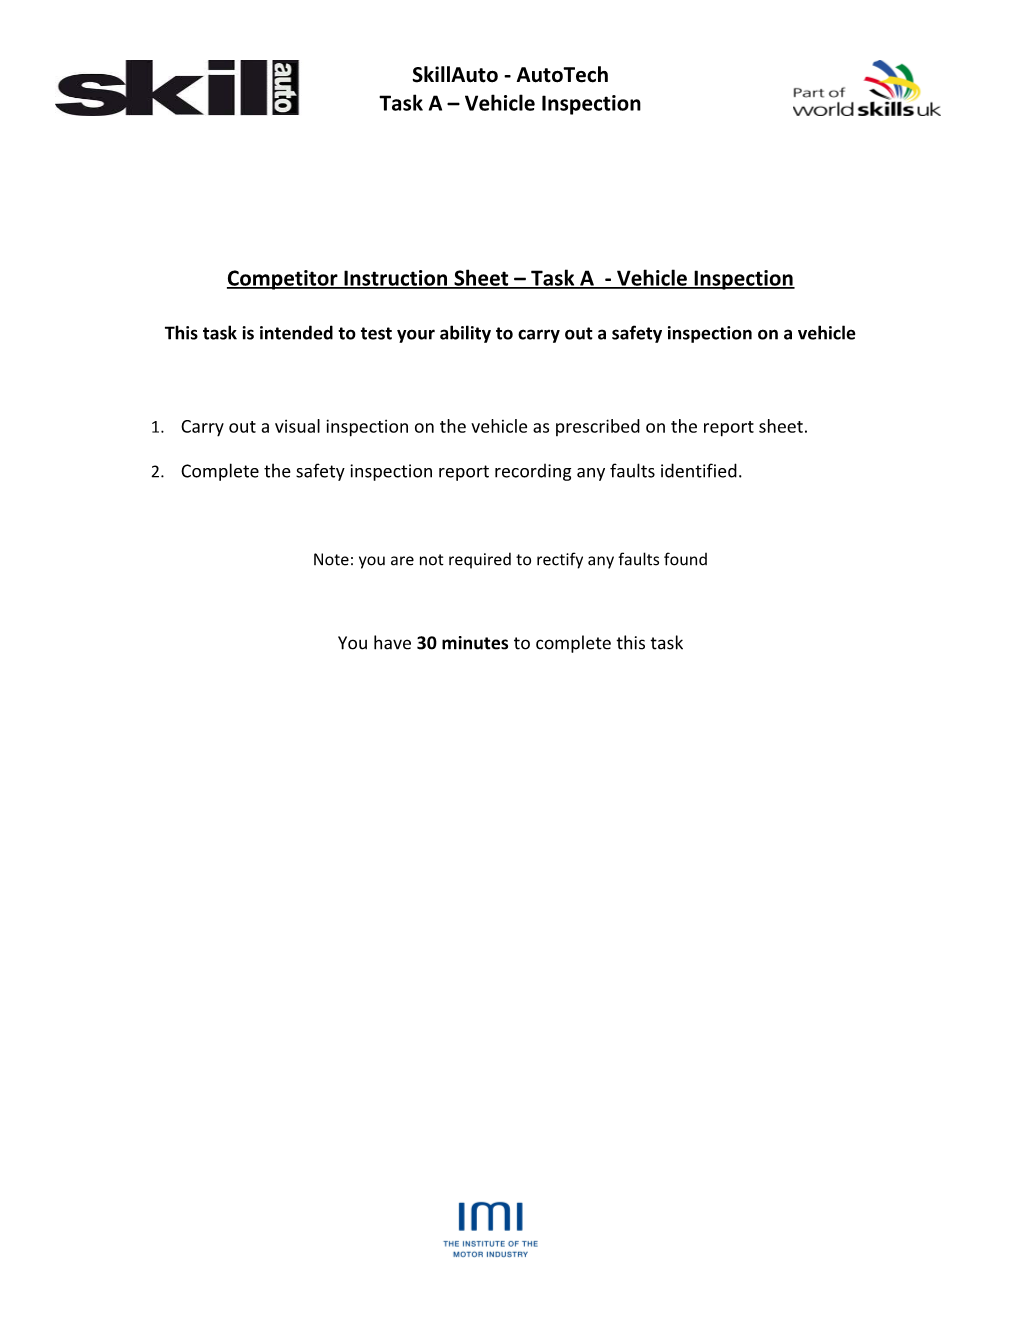 Competitor Instruction Sheet Task a -Vehicle Inspection